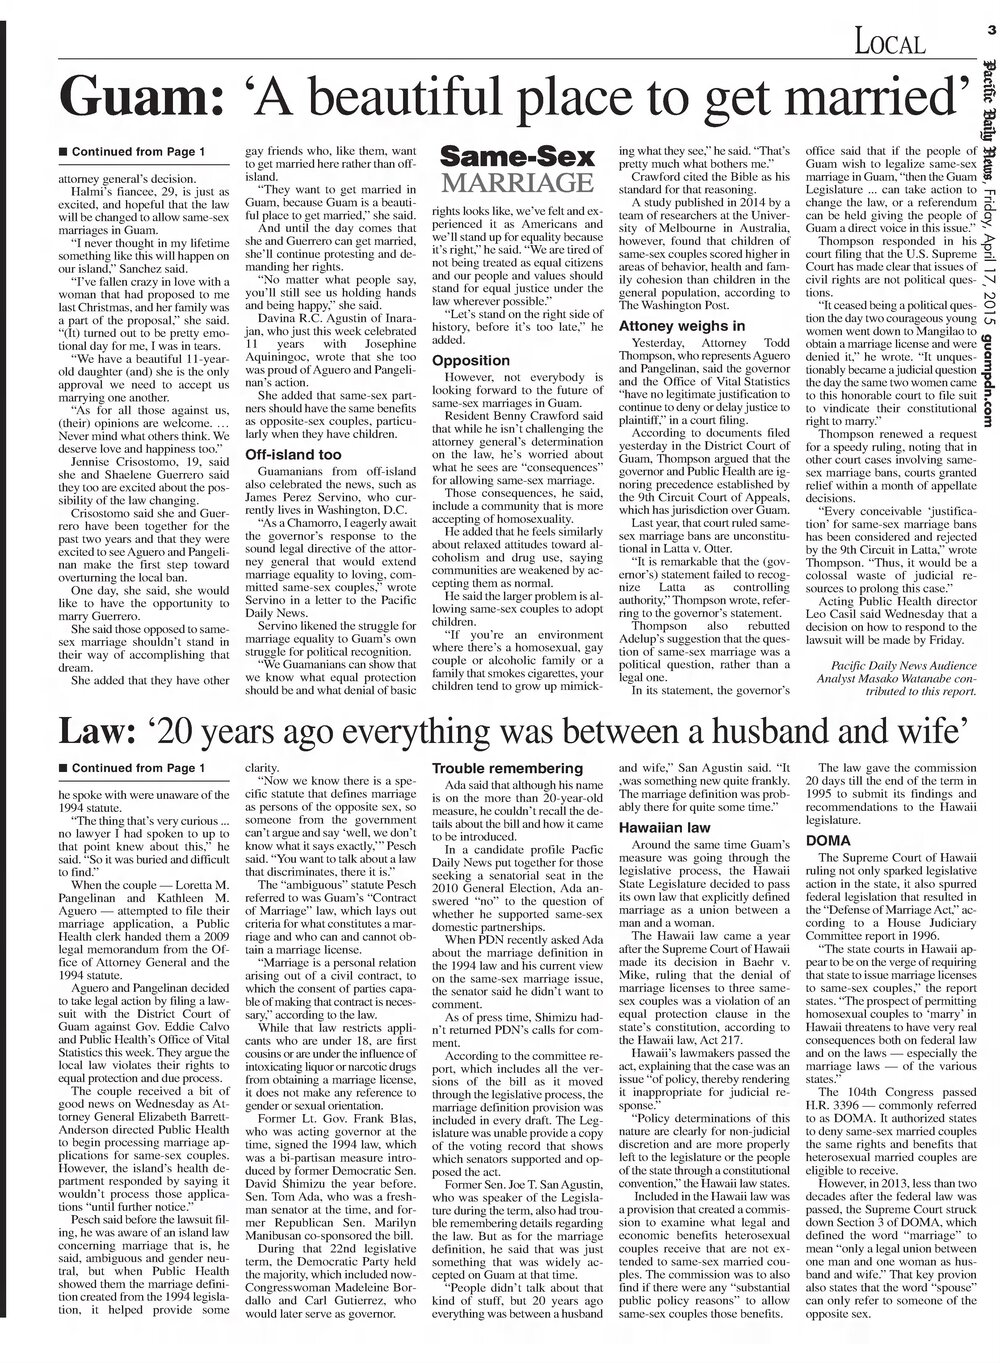 Pacific Daily News_April 17, 2015_Pg.3